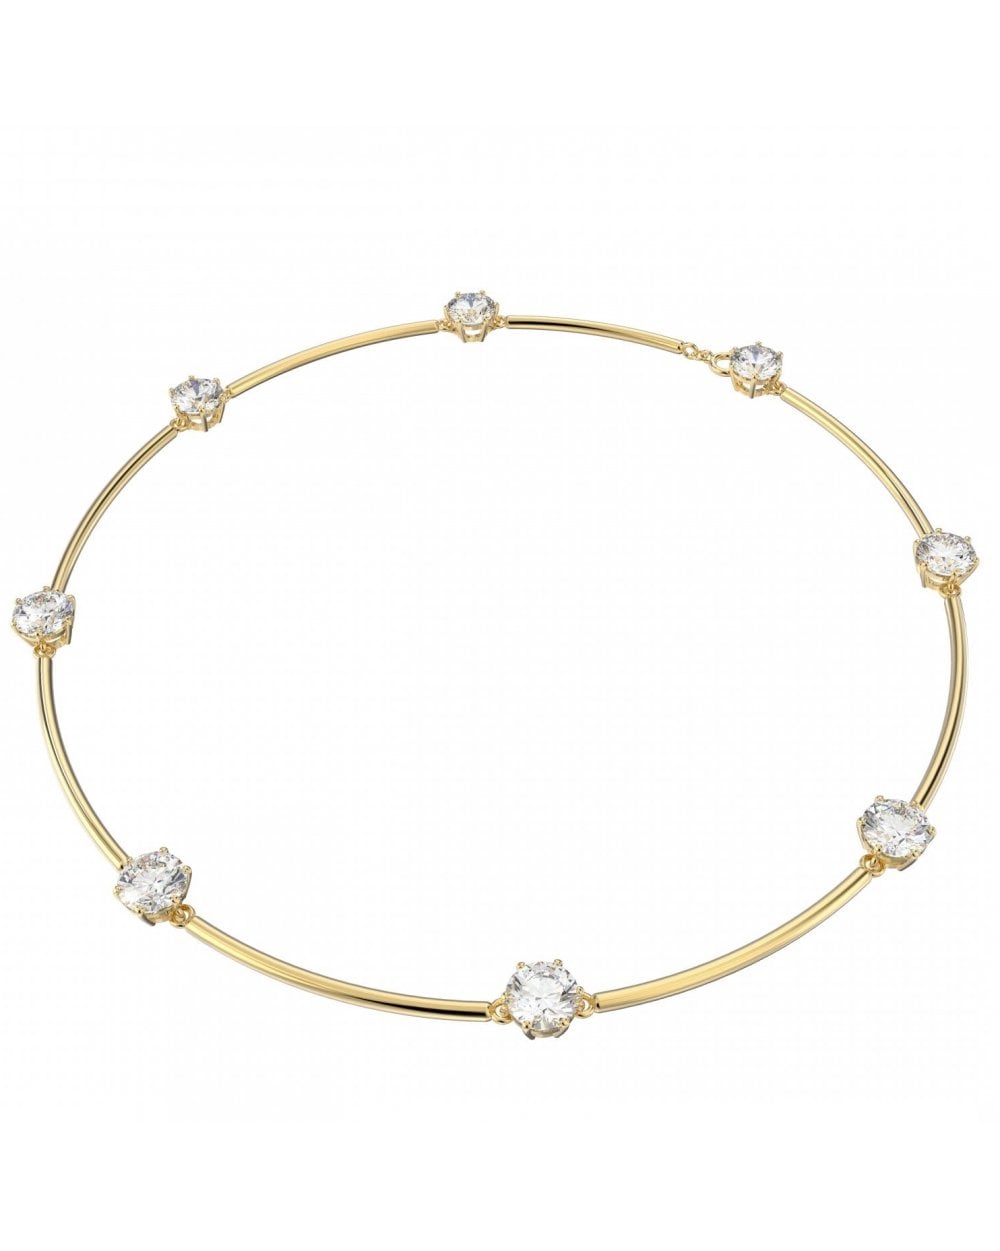 Constella Necklace - Gold Tone Plated